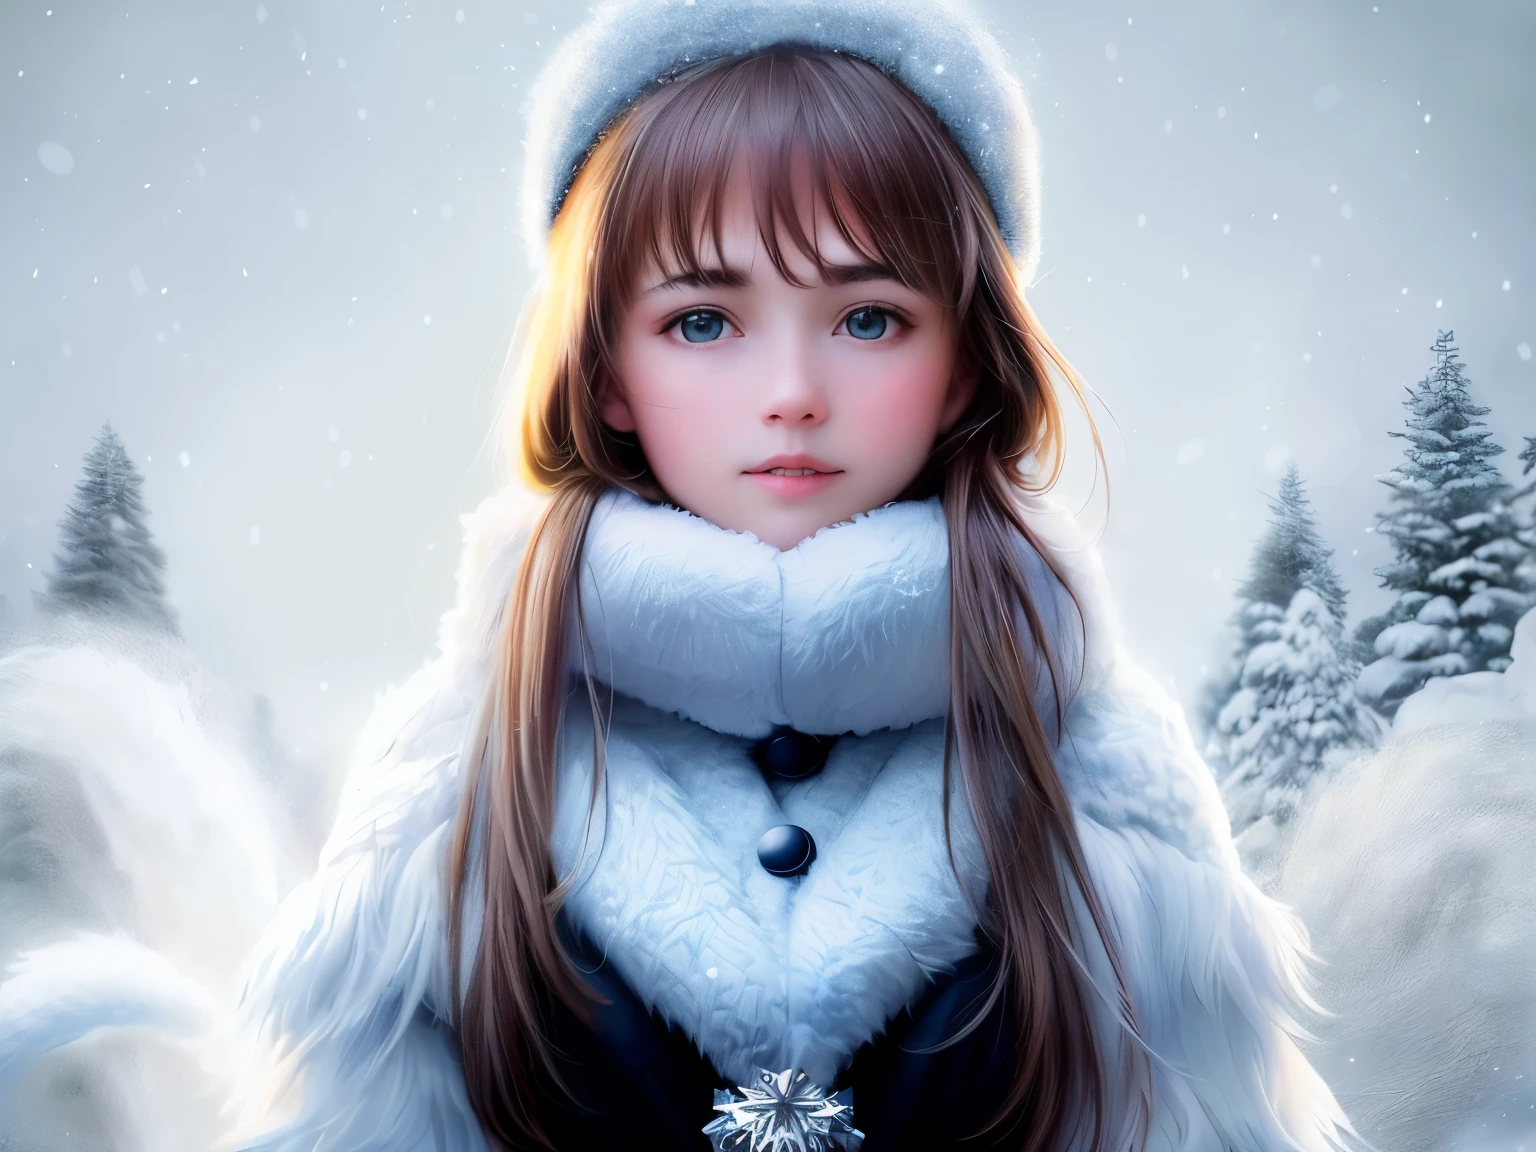 (RAW photo:1.2), (realistic:1.4), (highest quality:1.4), (ultra high resolution:1.2), (very detailed:1.3), (HDR:1.2), (cinematic lighting:1.3), (fine eyes), (facial details), (Fur details), (lots of snow:1.2). ), Cute Little Fox, Are standing, (3/4 Body Portrait: 1.2), (hairy tail: 1.2), (soft fur: 1.2), (Moe: 1.2), (looking at the audience), (innocent look), (soft light), (dreamy), (dream: 1.3), (ethereal: 1.3), (magic: 1.2), (snowflake: 1.2), (winter wonderland: 1.3), (Whimsical: 1.2), (fun: 1.2), some accessories, busts, alone